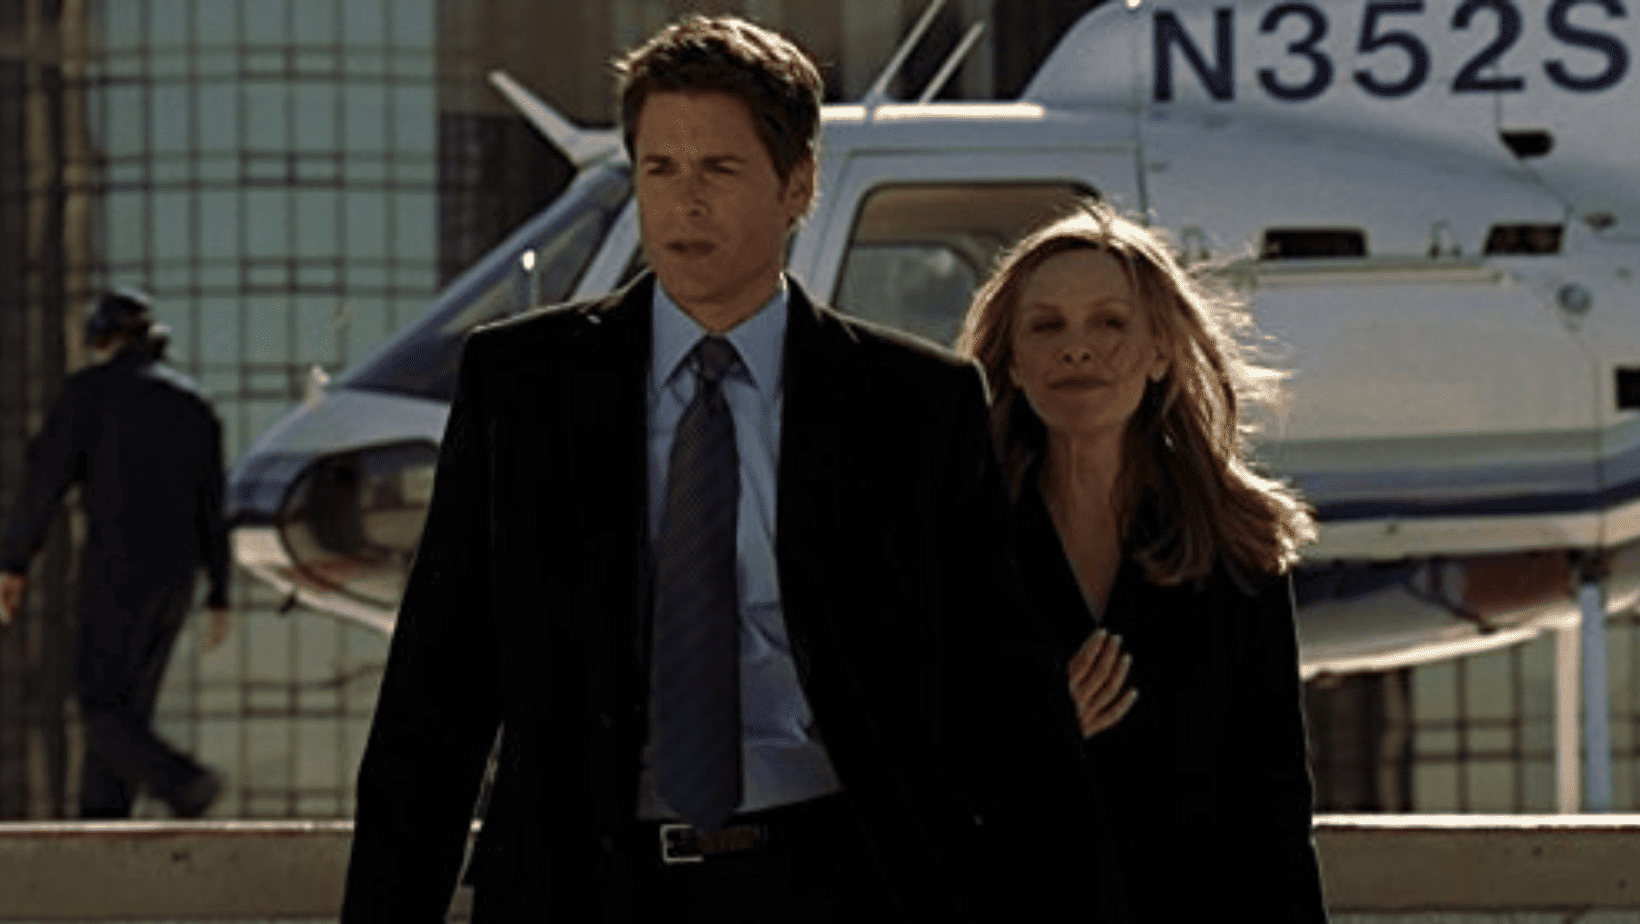 A couple walks arm in arm away from a helicopter in this image from Berlanti Television.